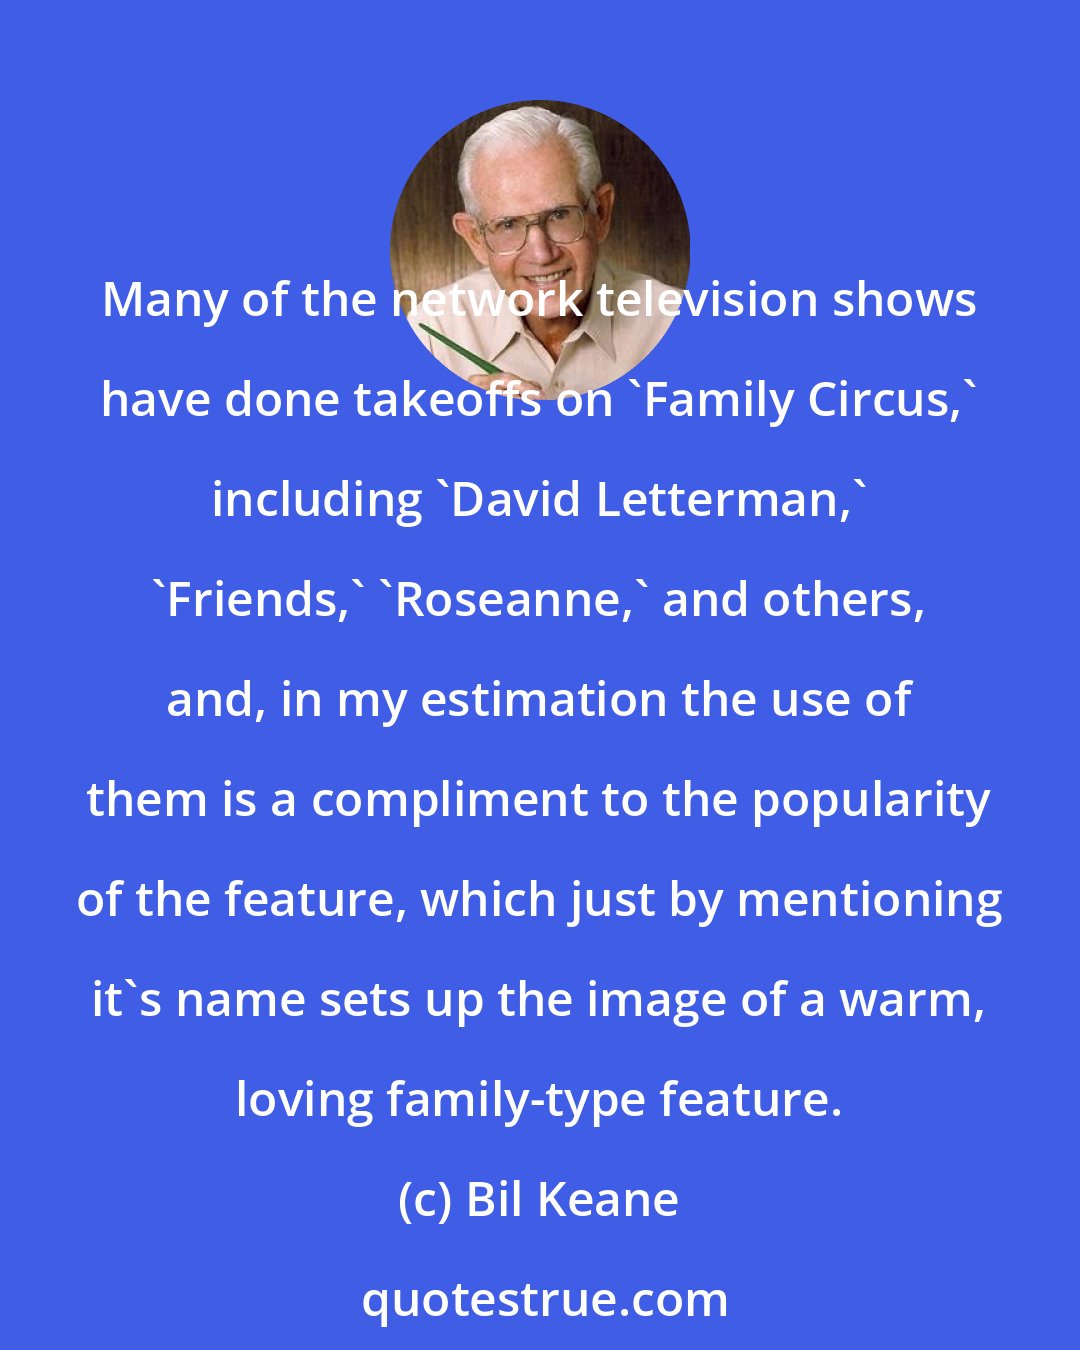 Bil Keane: Many of the network television shows have done takeoffs on 'Family Circus,' including 'David Letterman,' 'Friends,' 'Roseanne,' and others, and, in my estimation the use of them is a compliment to the popularity of the feature, which just by mentioning it's name sets up the image of a warm, loving family-type feature.